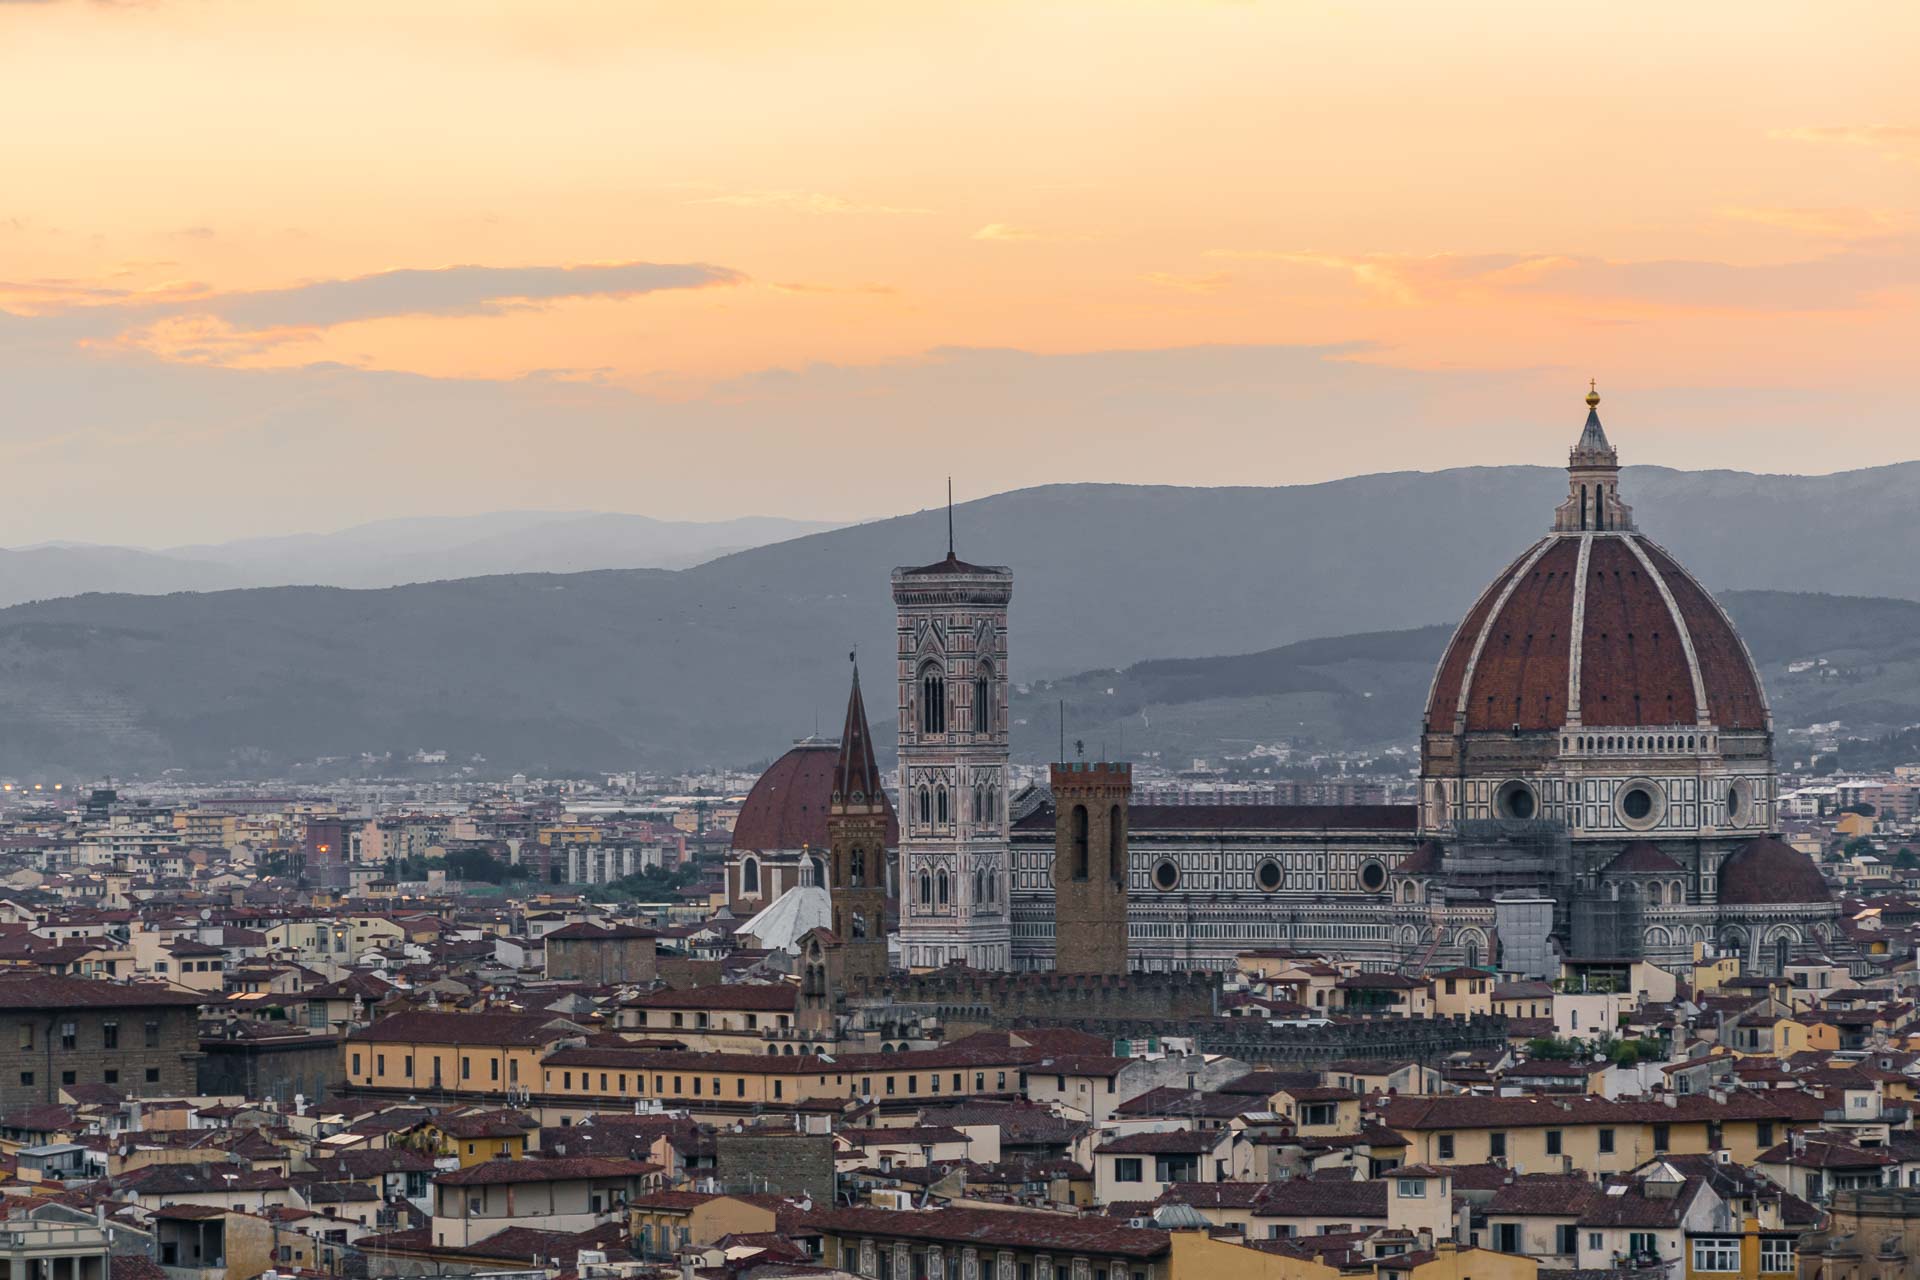 Firenze, the best town in Tuscany, with the cathedral standing out during the sunset